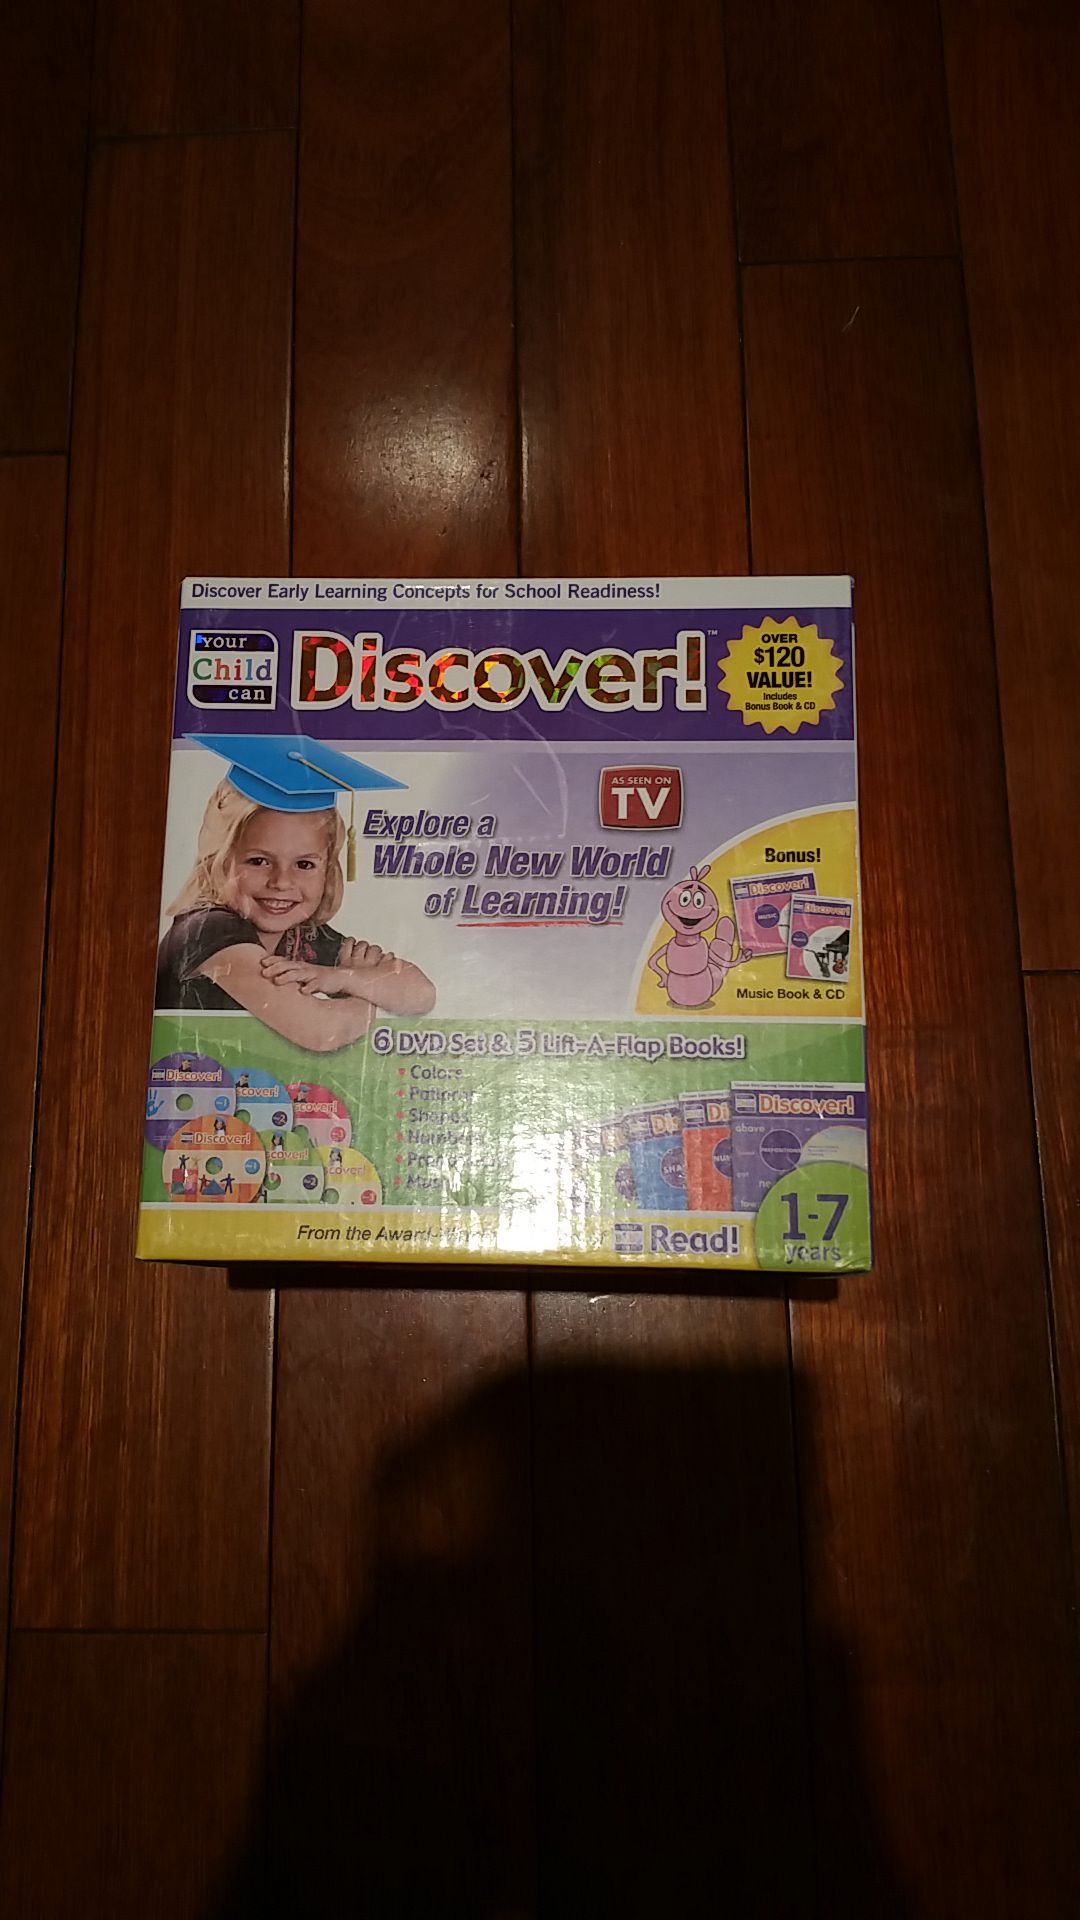 Education DVD with book “Your child can Discover”